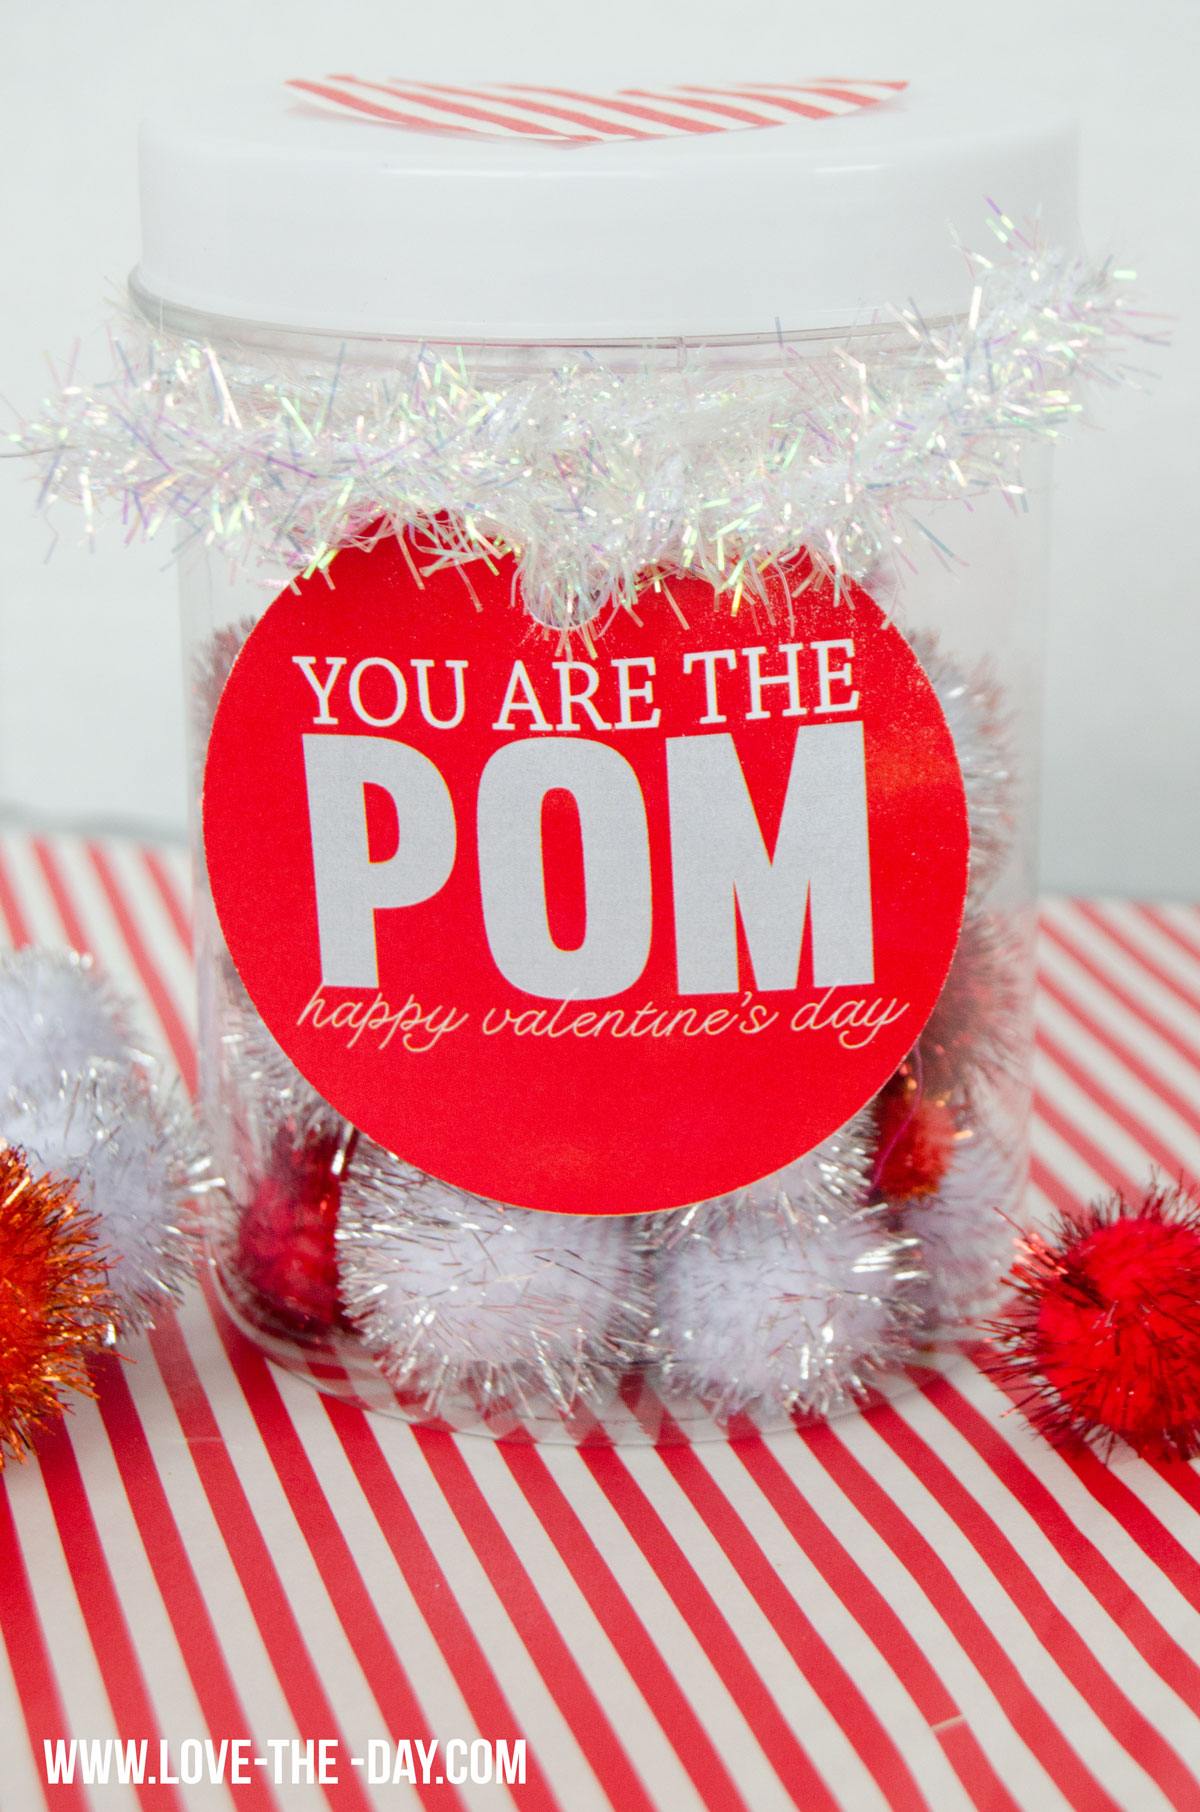 "You are the POM" Free Printable Valentine Tags by Lindi Haws